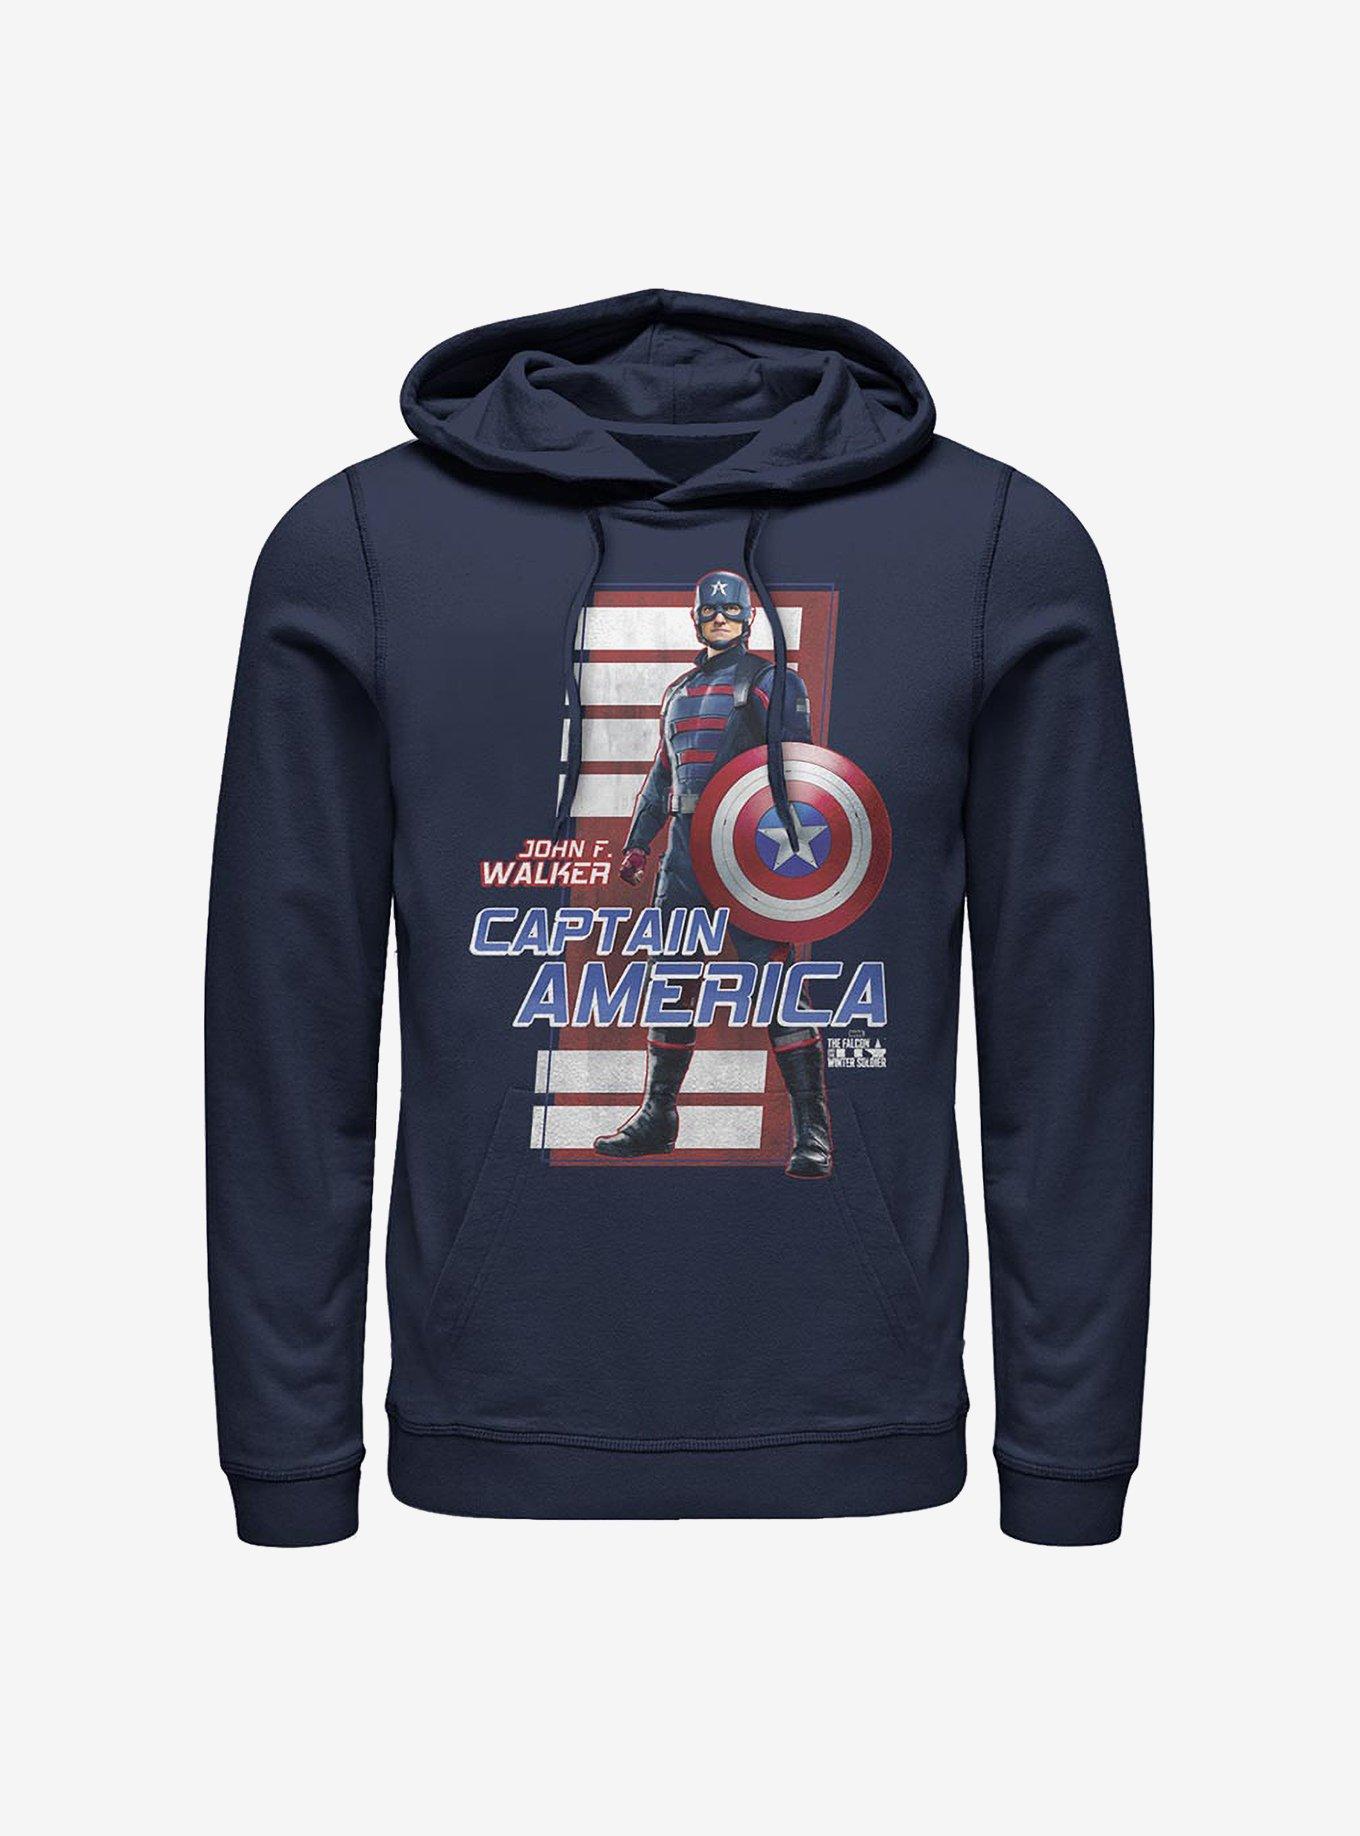 Marvel The Falcon And The Winter Soldier John F. Walker Captain America Hoodie, NAVY, hi-res